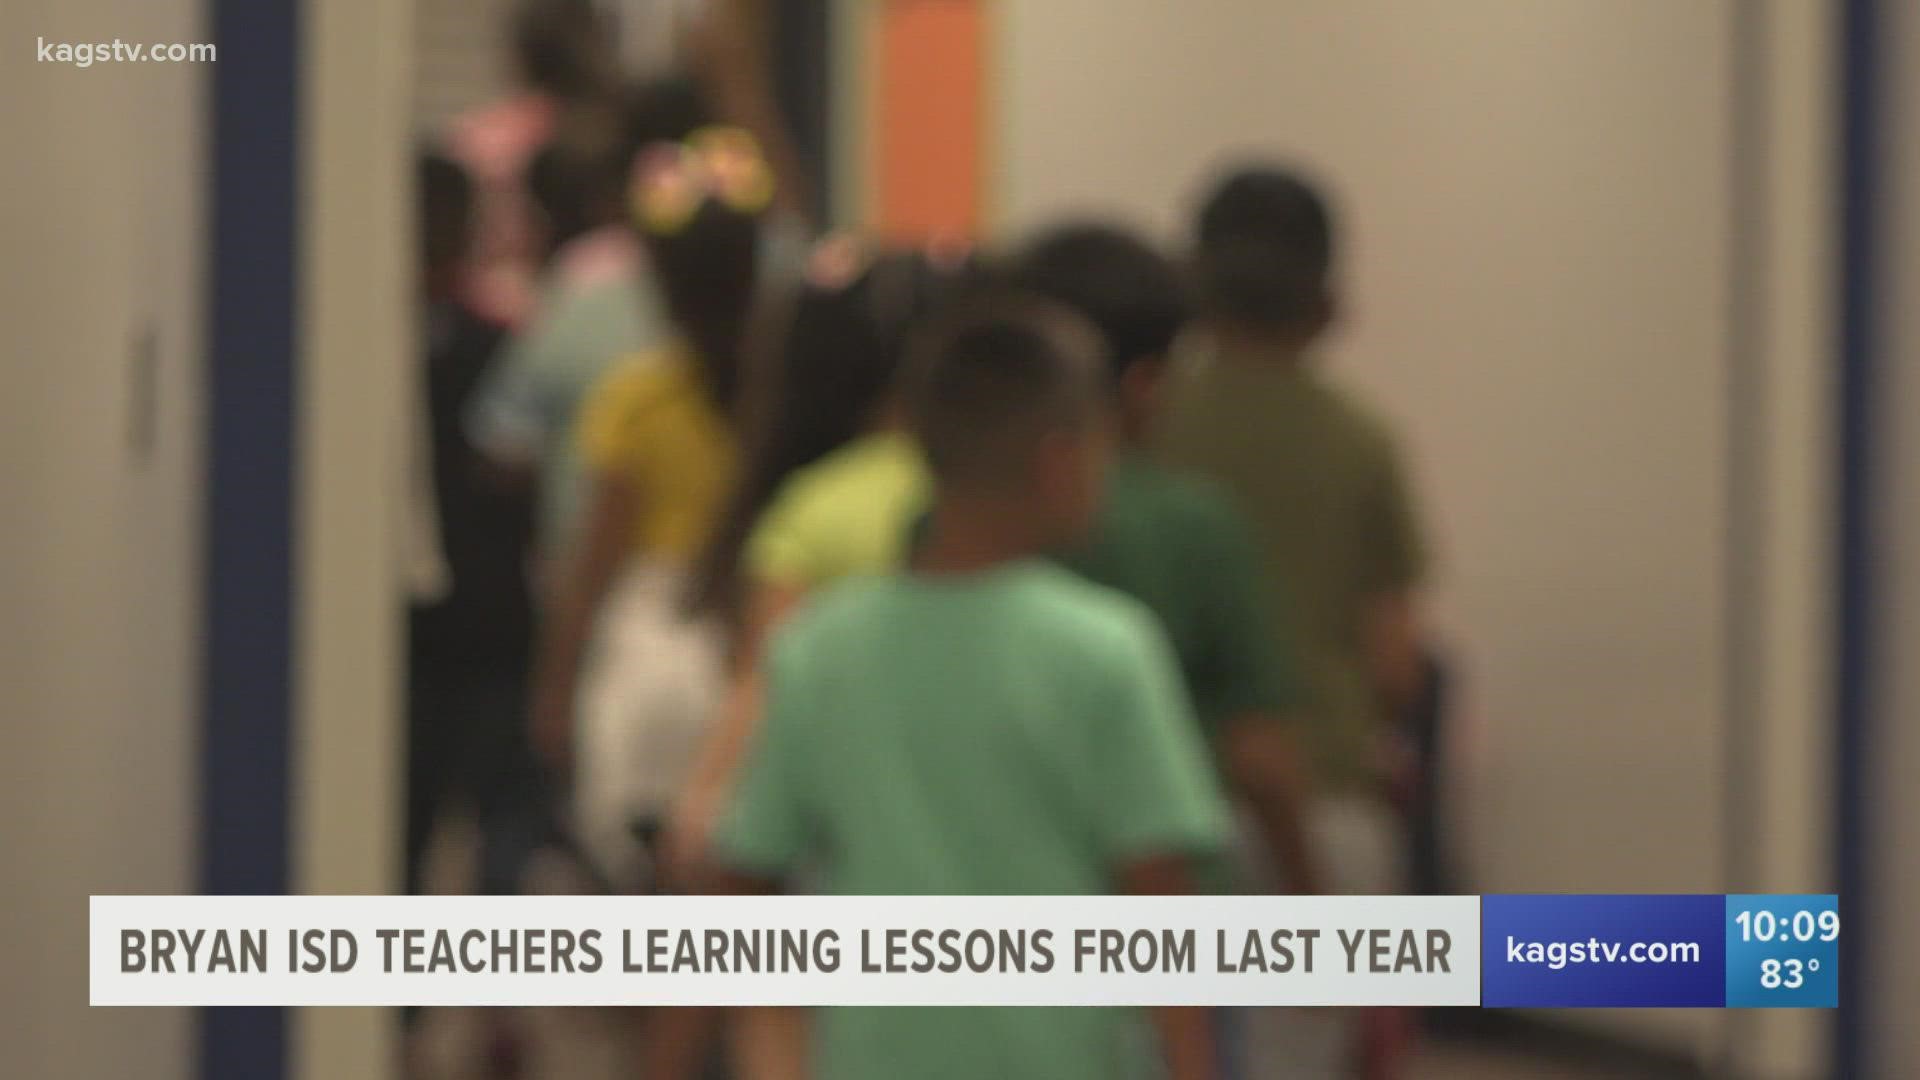 Teachers are looking to keep school life as normal as possible